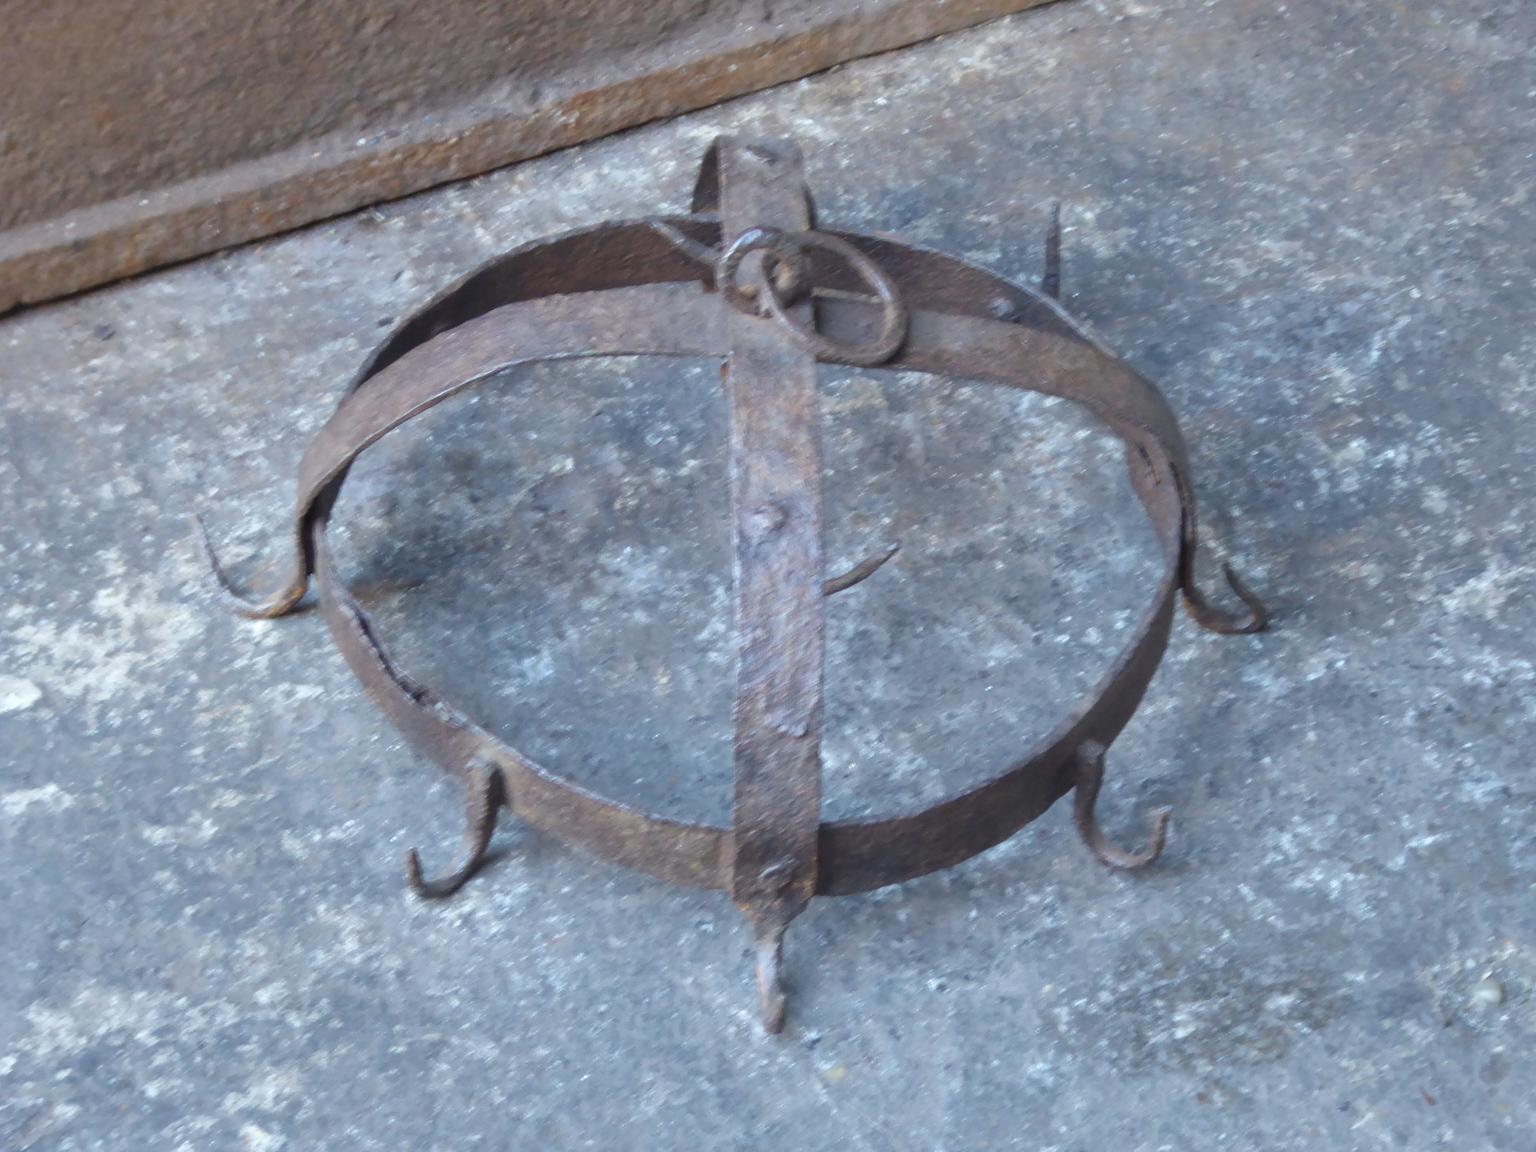 17th century Dutch Louis XIV crown used for hanging game and birds. The crown is made of wrought iron and is in a good condition.